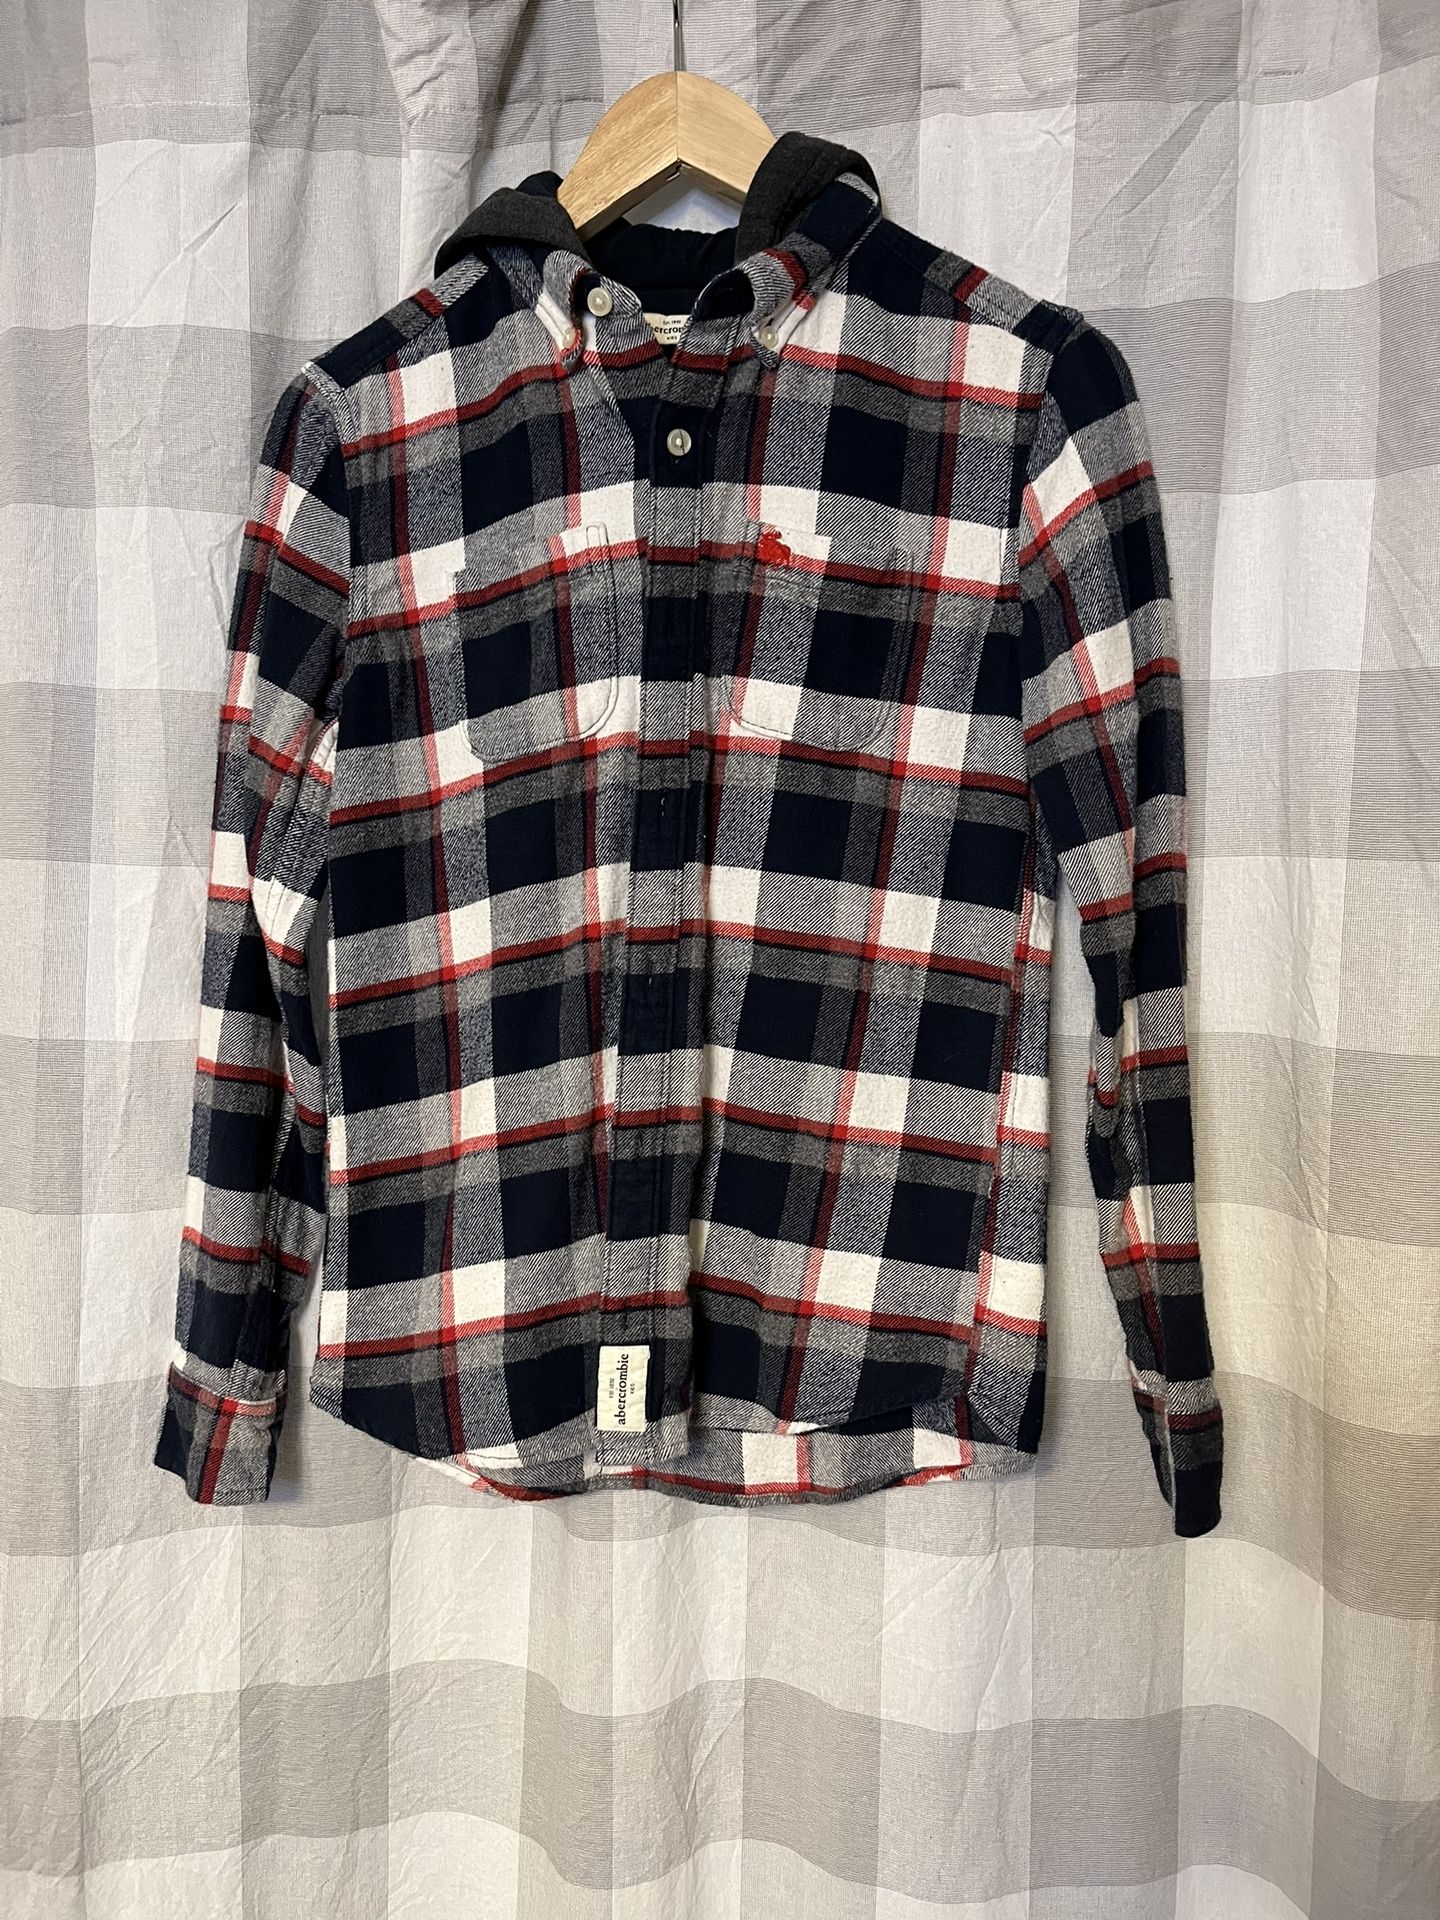 Abercrombie Kids Hooded Flannel Shirt Boys Size 13/14  Red White & Blue Plaid